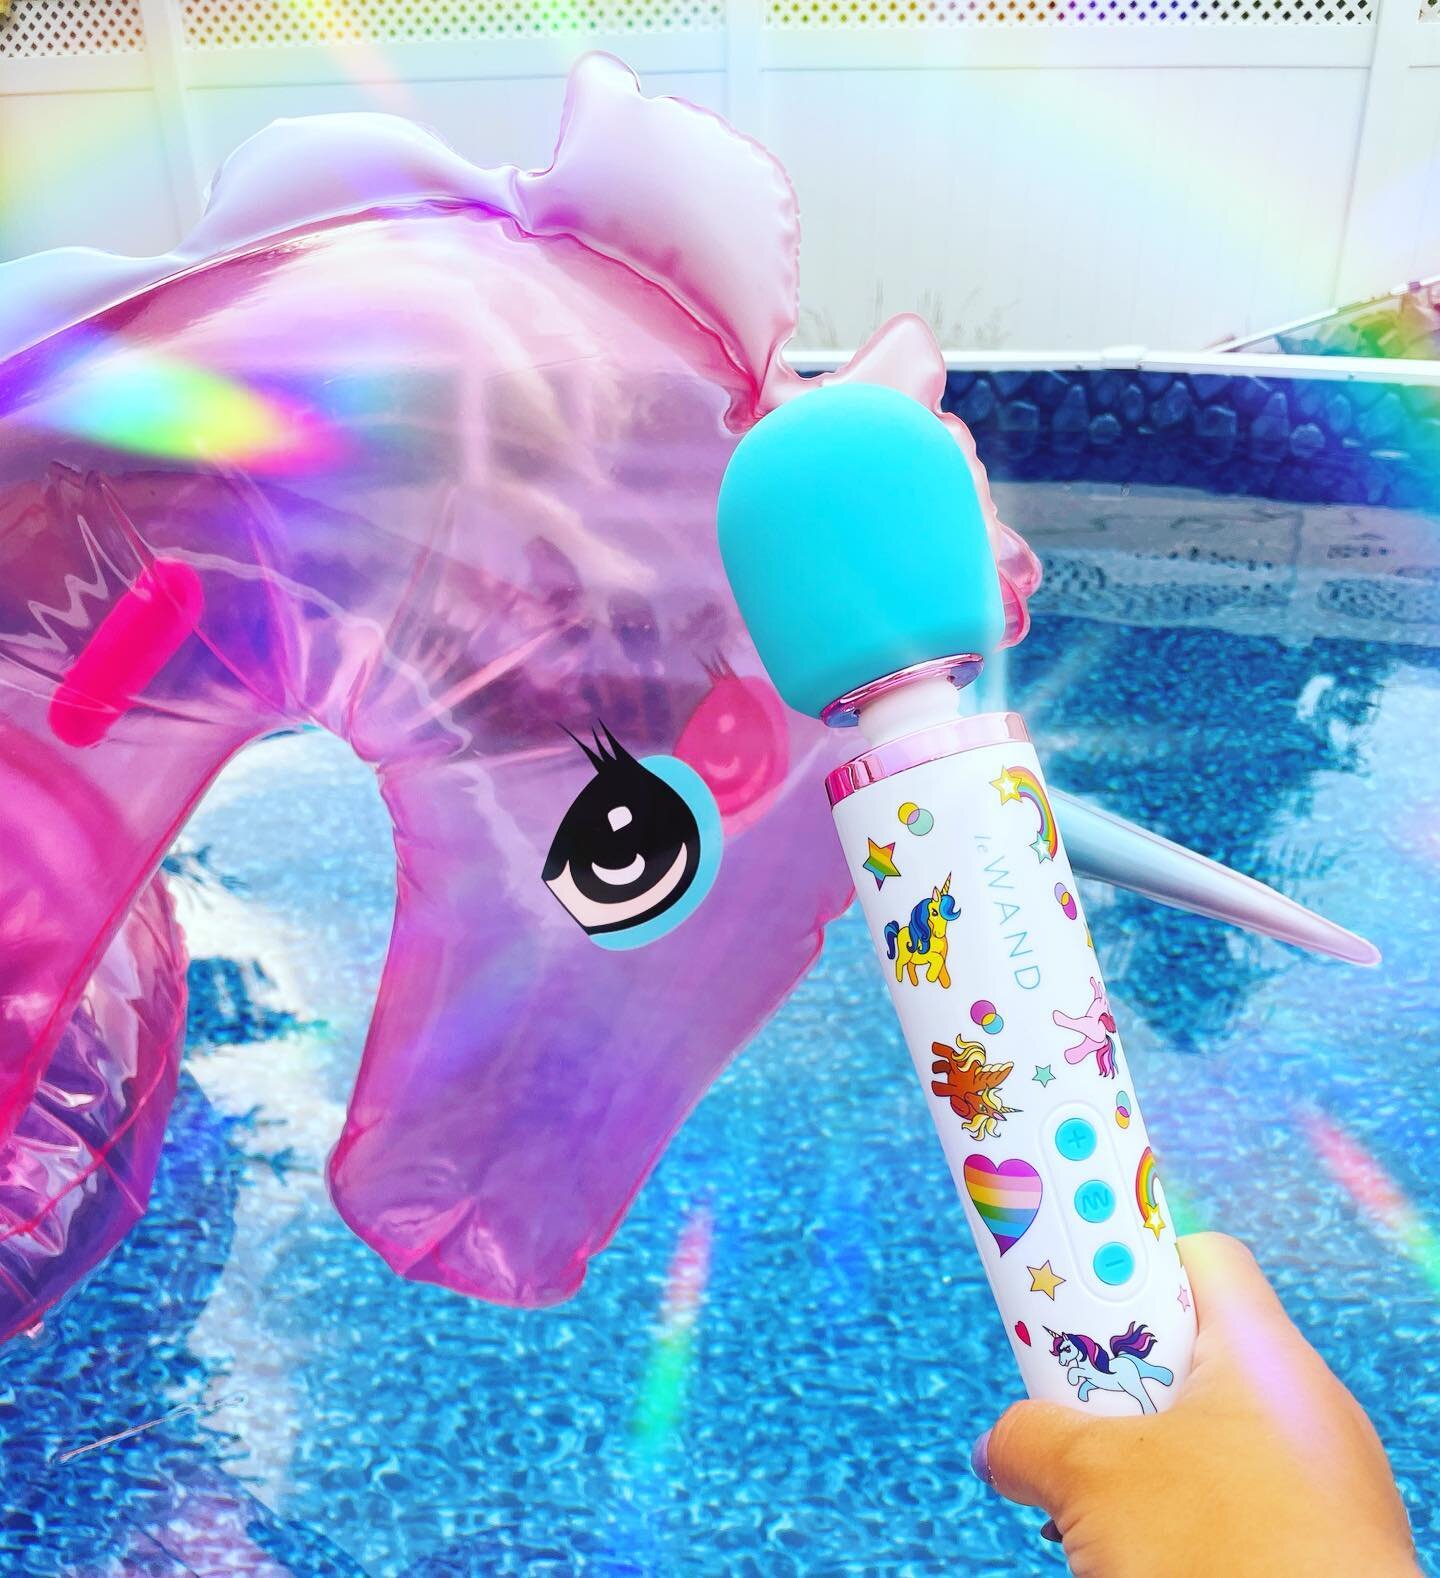 I&rsquo;m so excited about the new @lewandmassager Unicorn Wand. She&rsquo;s so cute!!! 

#goodvibes #vibrators #lewand #wandvibrator #unicorn #unicornparty #unicornvibes #rainbow #unicornfloat #selflove #selfcare